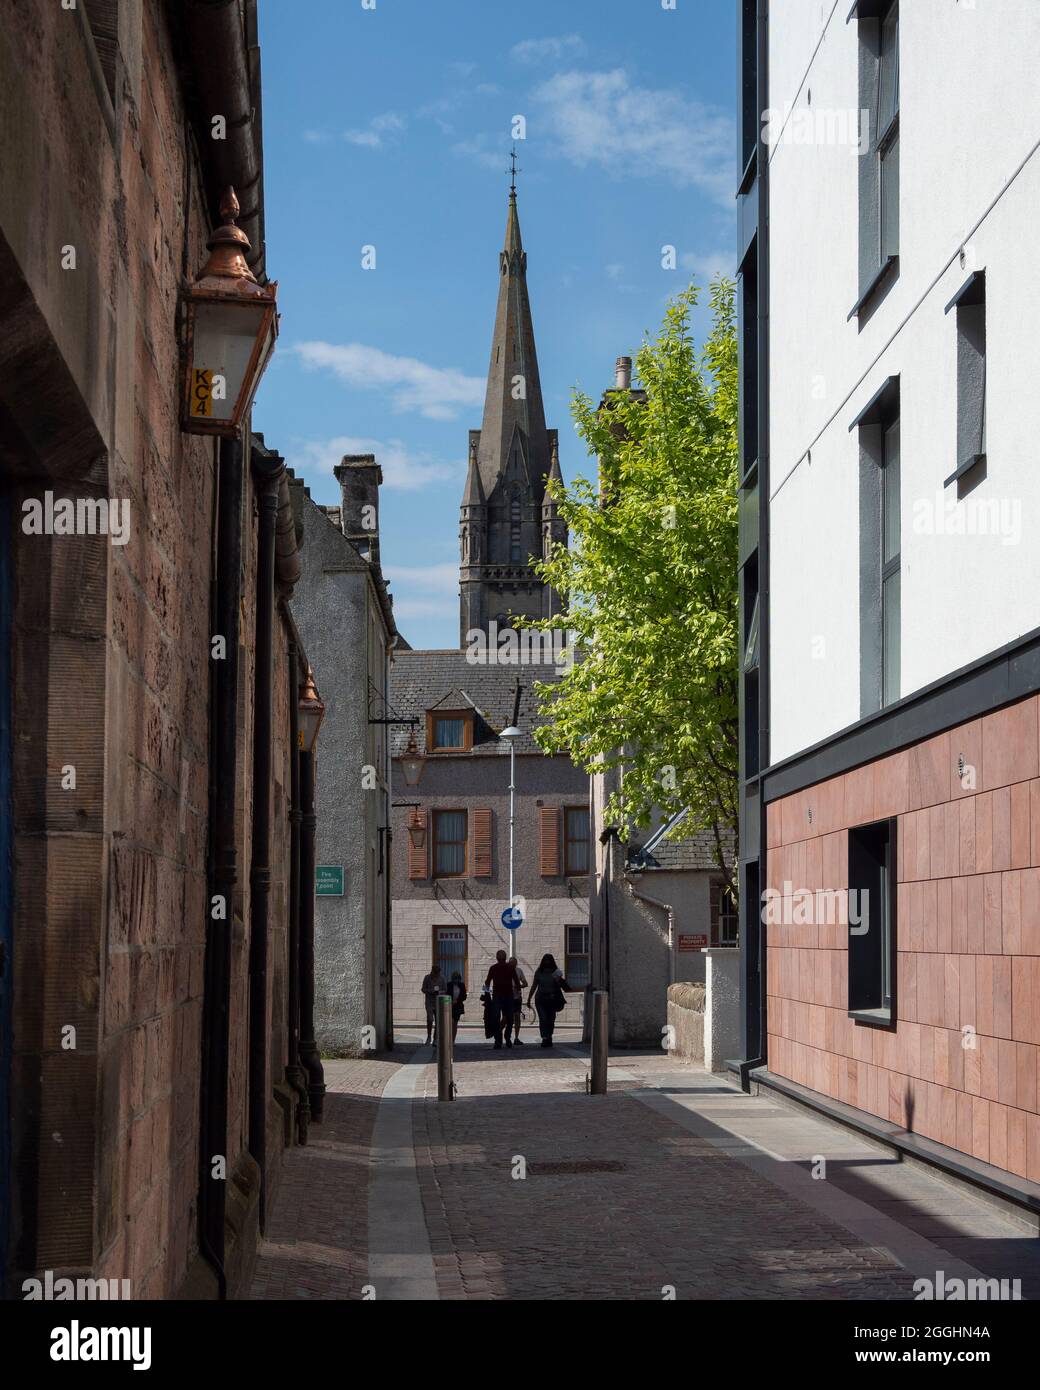 A mixture of old and new architecture and street furniture in School Lane, Inverness, Scotland Stock Photo